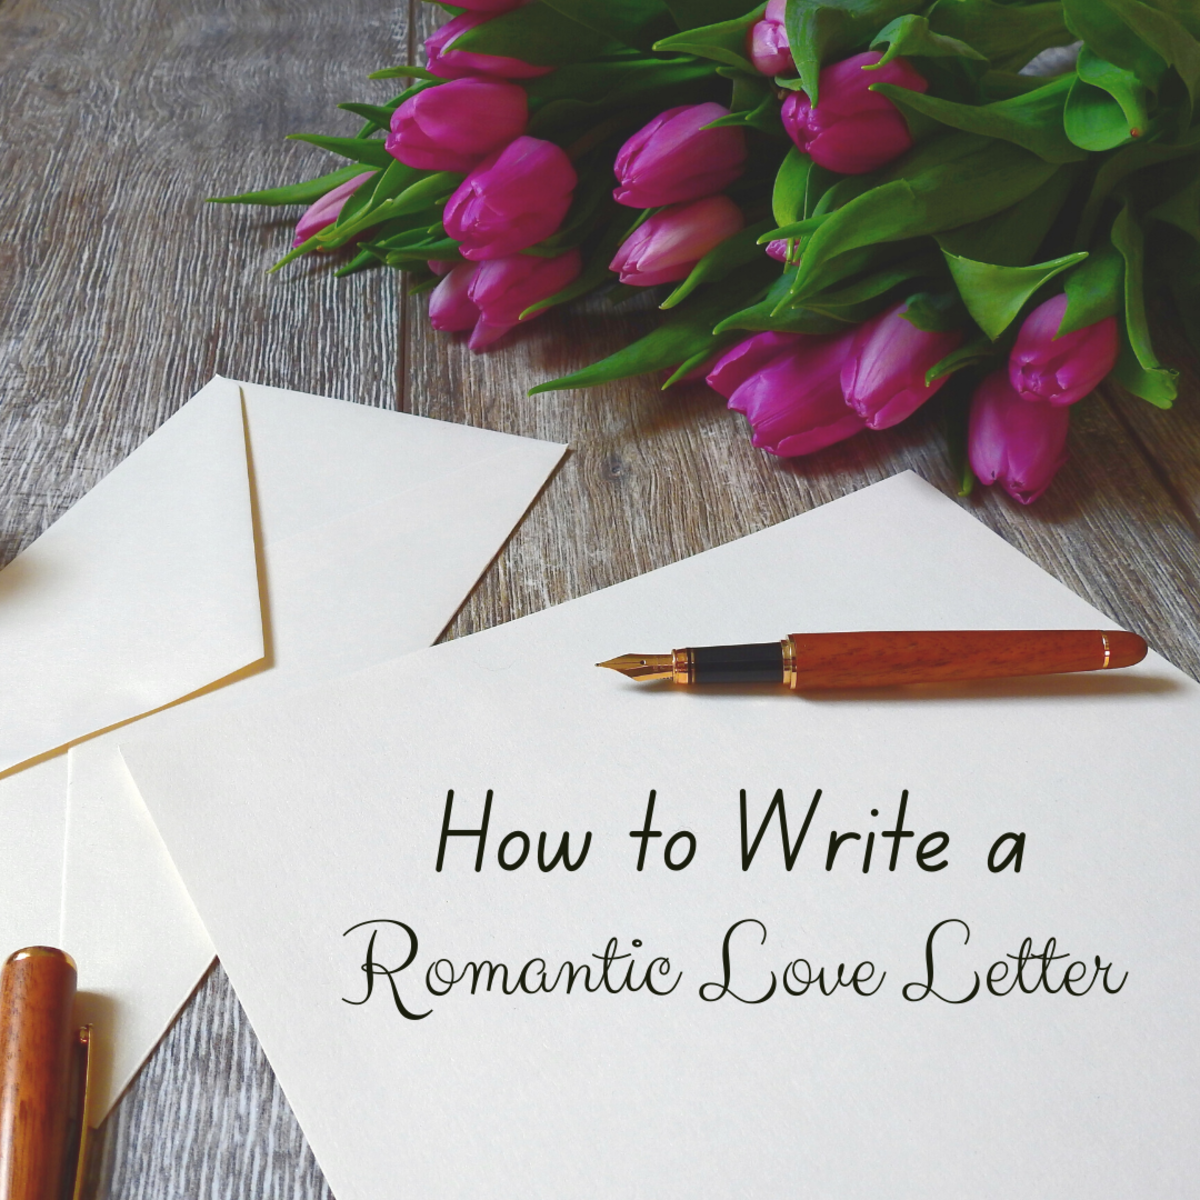 Tips and tricks for writing a sweet, romantic love letter from start to finish